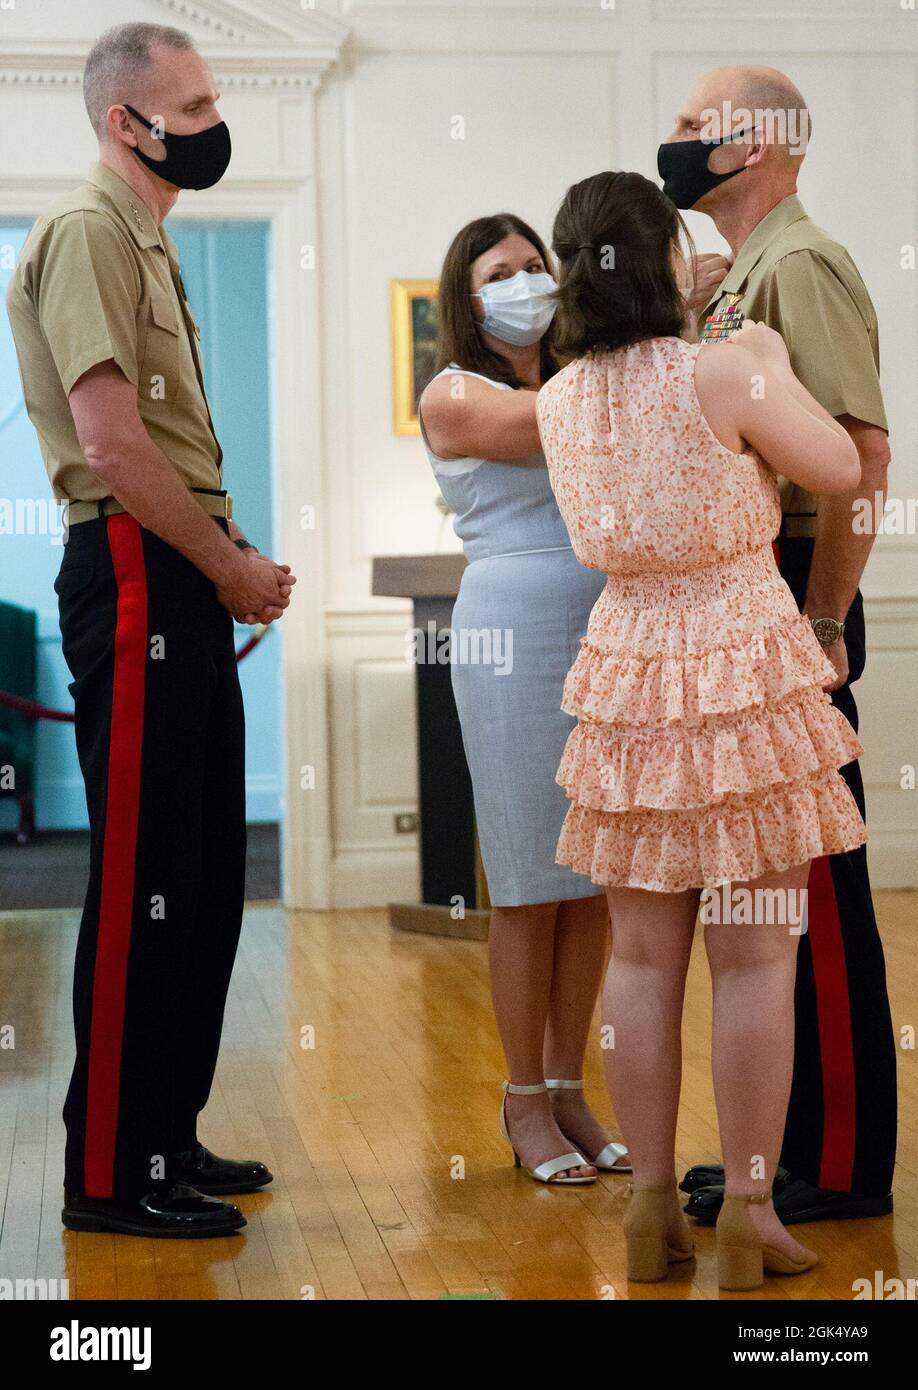 U.S. Marine Corps Lt. Gen. Kevin M. Iiams, Commanding General, Training and Education Command, is pinned by his family during his frocking ceremony at Harry Lee Hall in Quantico, Virginia, August 3, 2021.  Iiams was promoted to Lt. Gen after many years of faithful service. Stock Photo